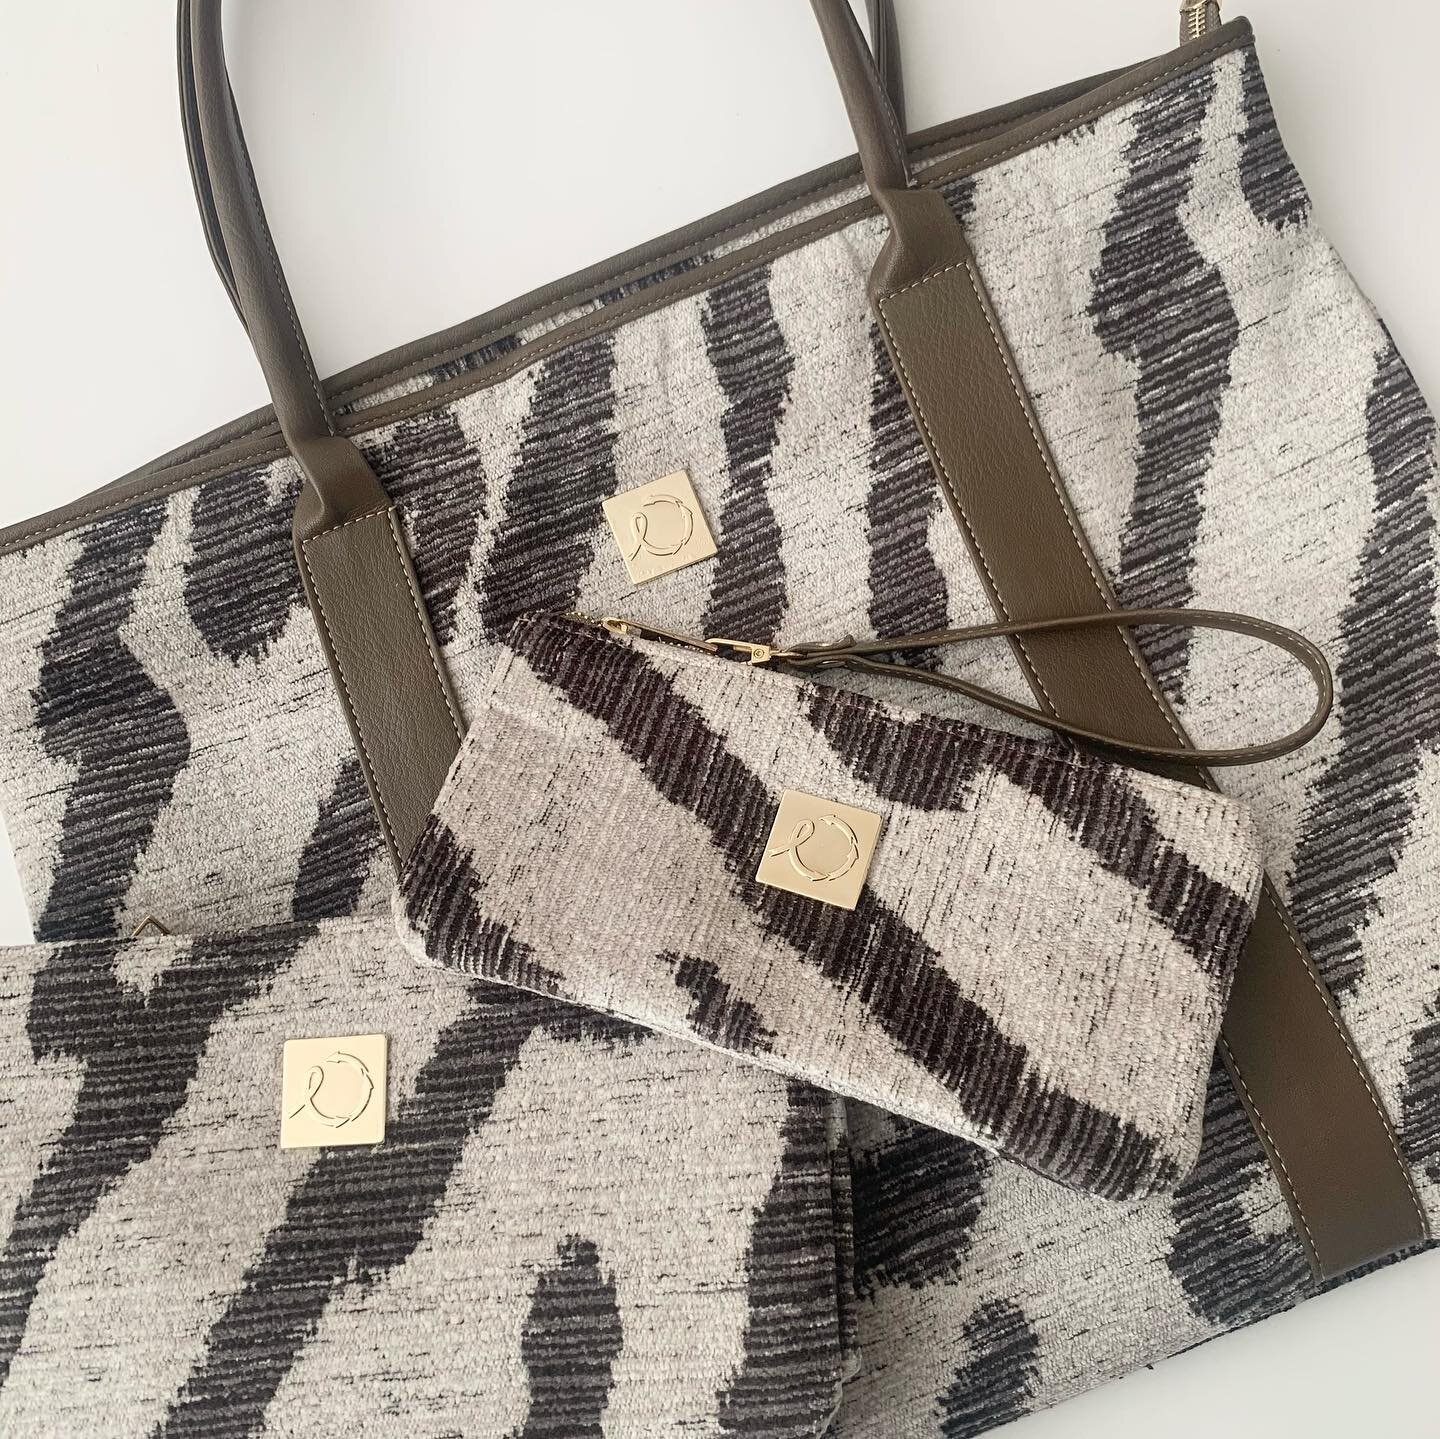 Check out these new matching sets, available at @hangupsnc in High Point, NC! 😍♻️❤️ #upcycle #upcycledbags #sustainablefashion #foragoodcause #curecf #cysticfibrosisawareness #shopwithpurpose #shopsmall #triadsmallbusiness #highpointnc #shopforacaus